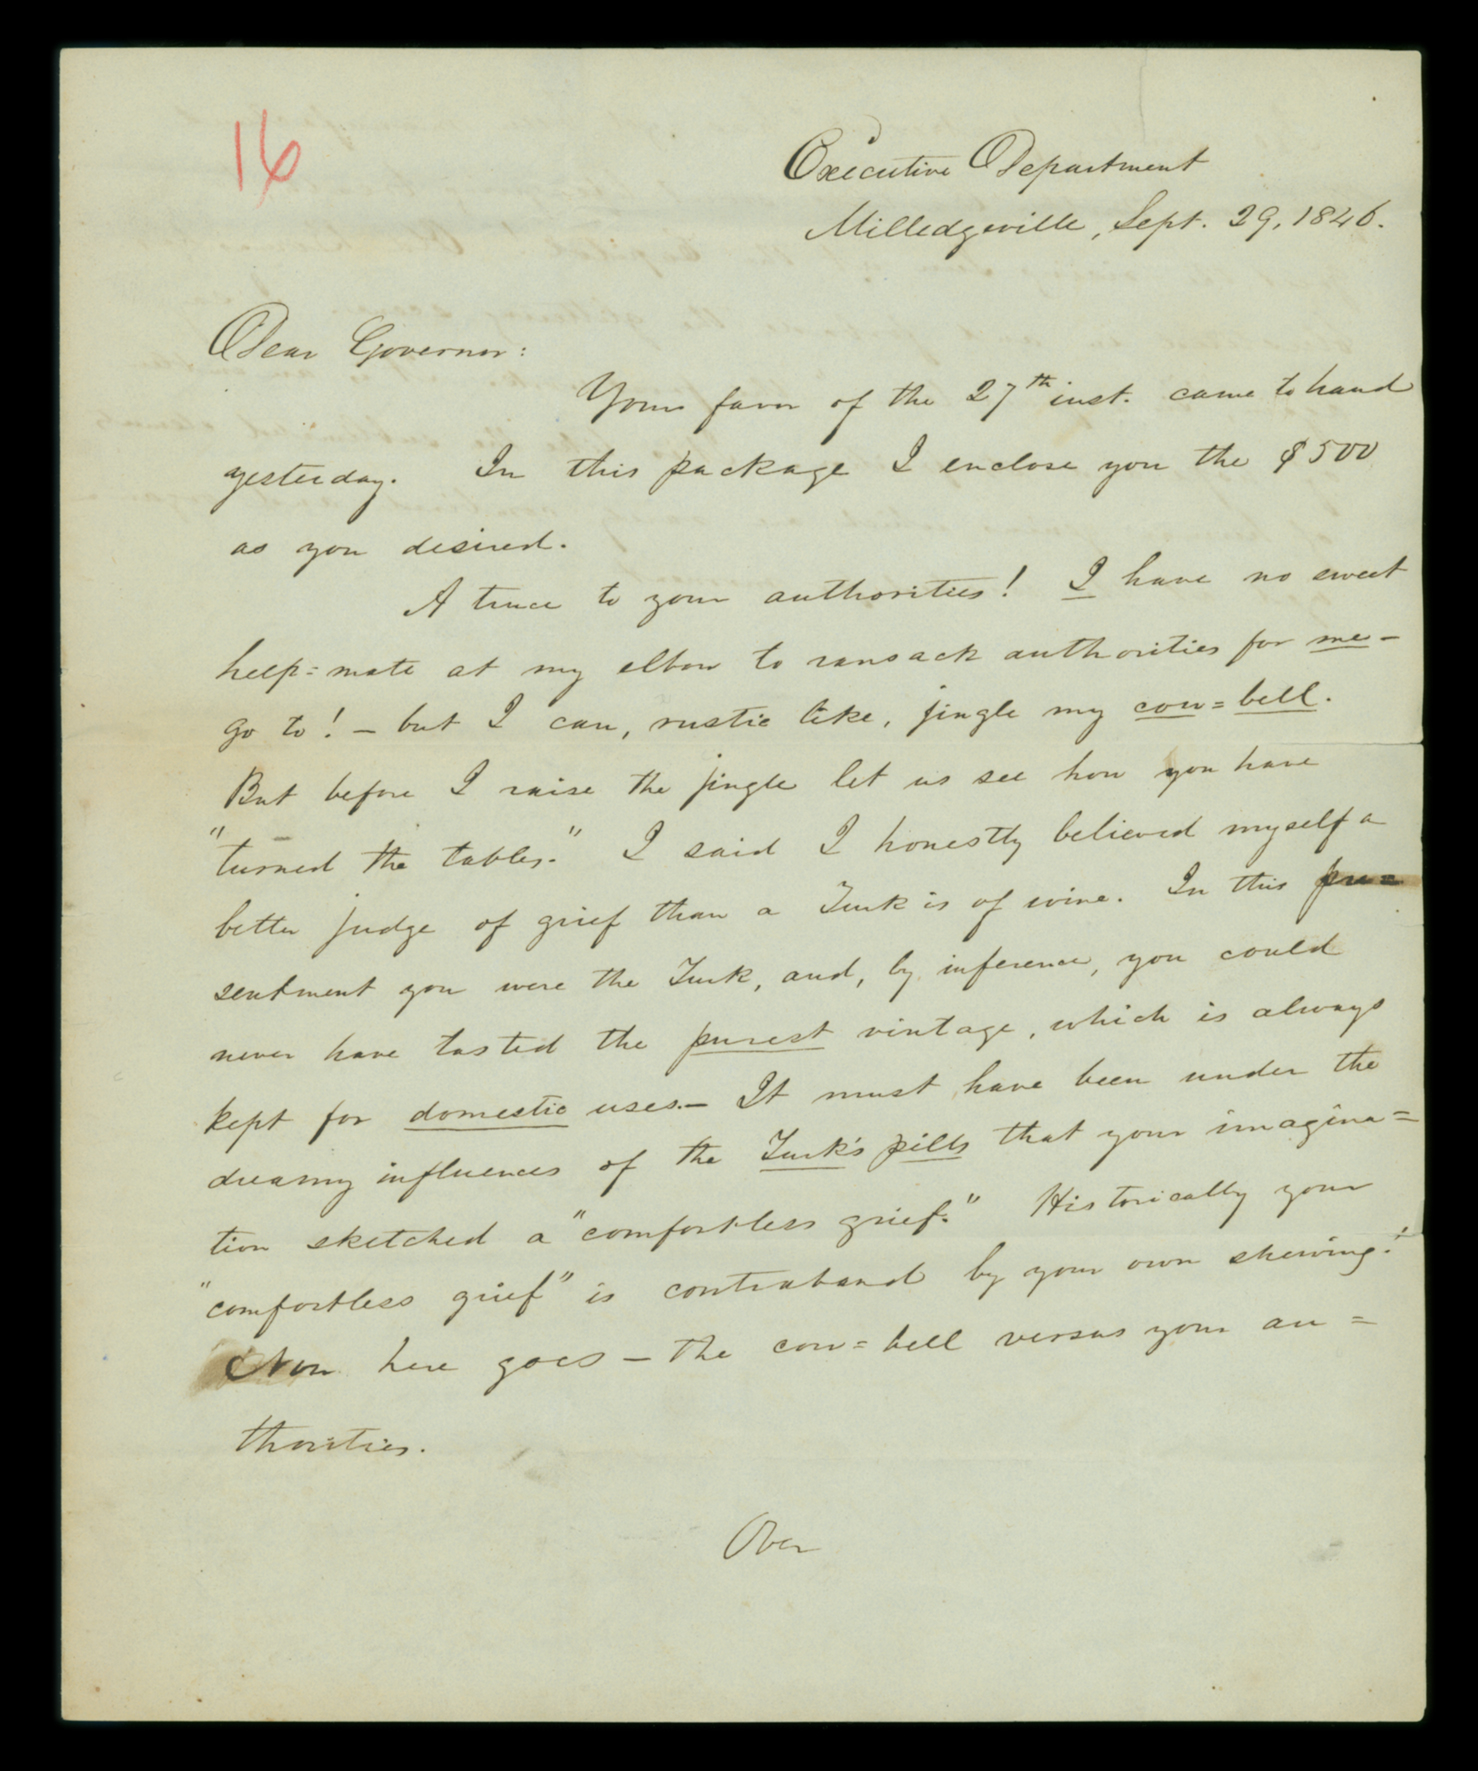 Letter, L. J. Anderson, Milledgeville, Georgia, to His Excellency Geo[rge] W. Crawford, Belair, Georgia, Page 1